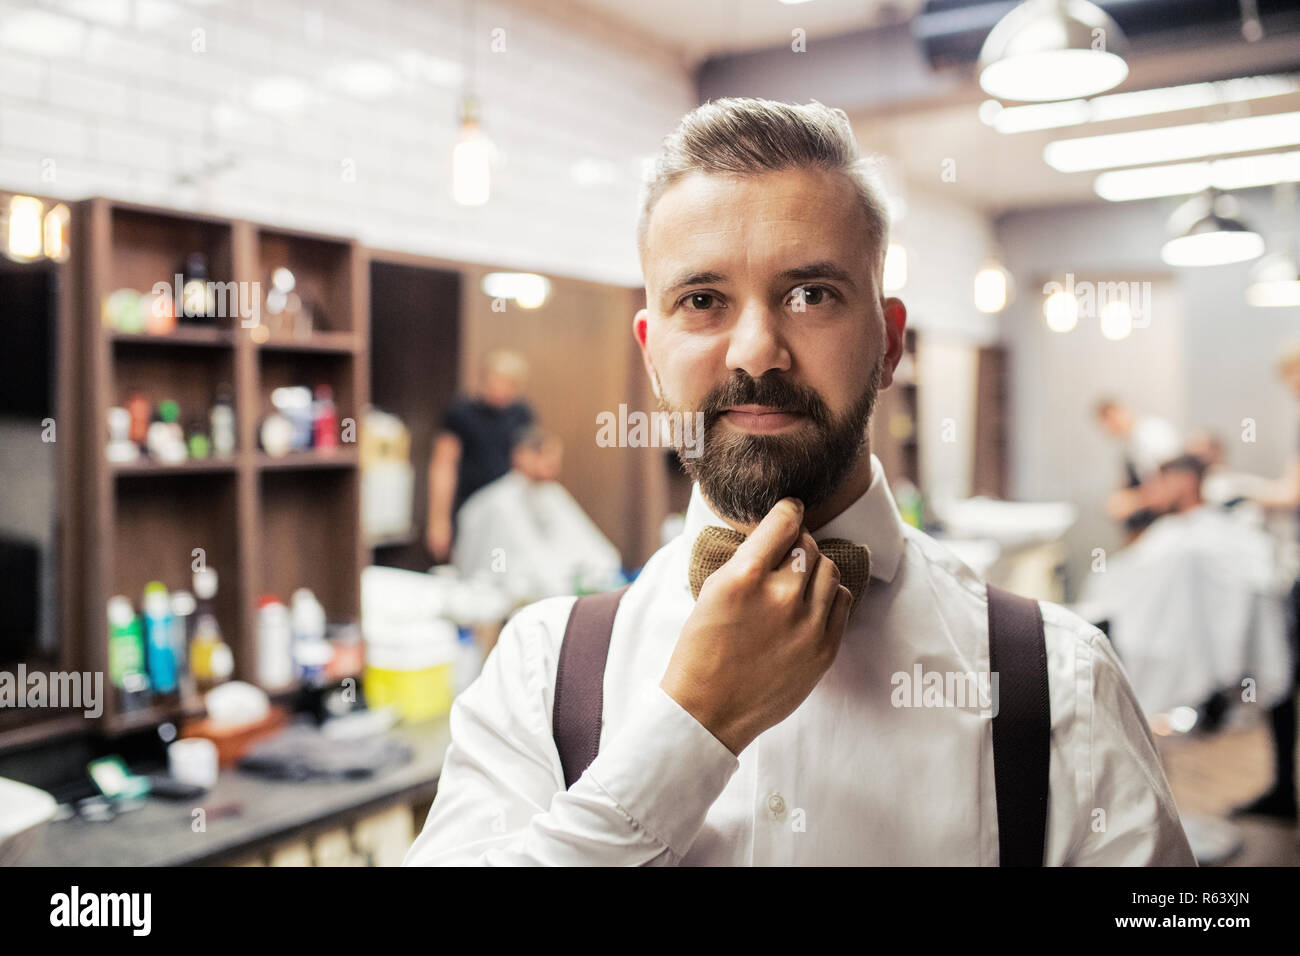 A portrait of handsome hipster man client standing in barber shop. Stock Photo